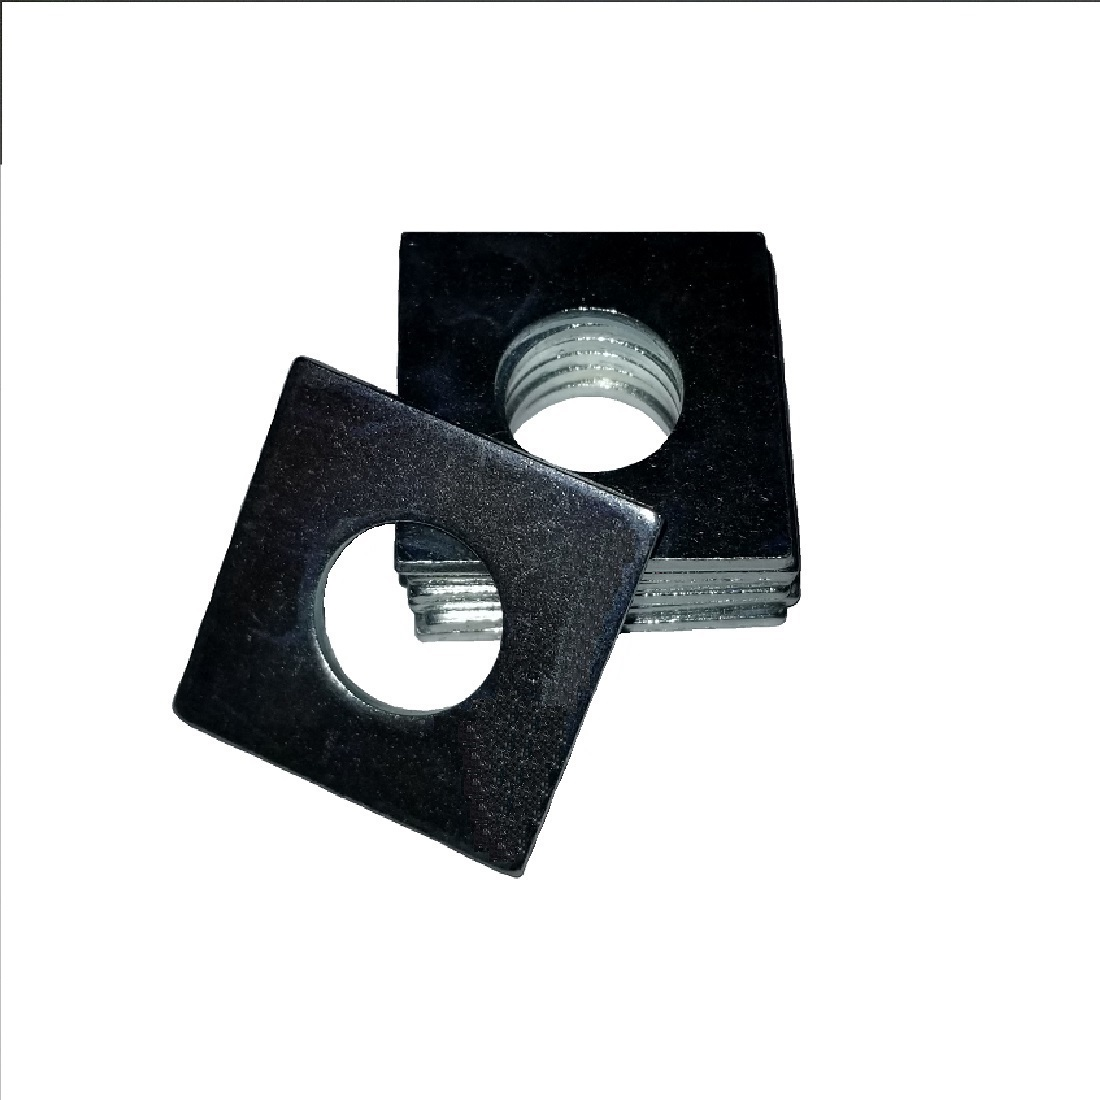 Square OD Washer - 0.113 ID, 0.370 OD, 0.030 Thick, Stainless - 300 Series